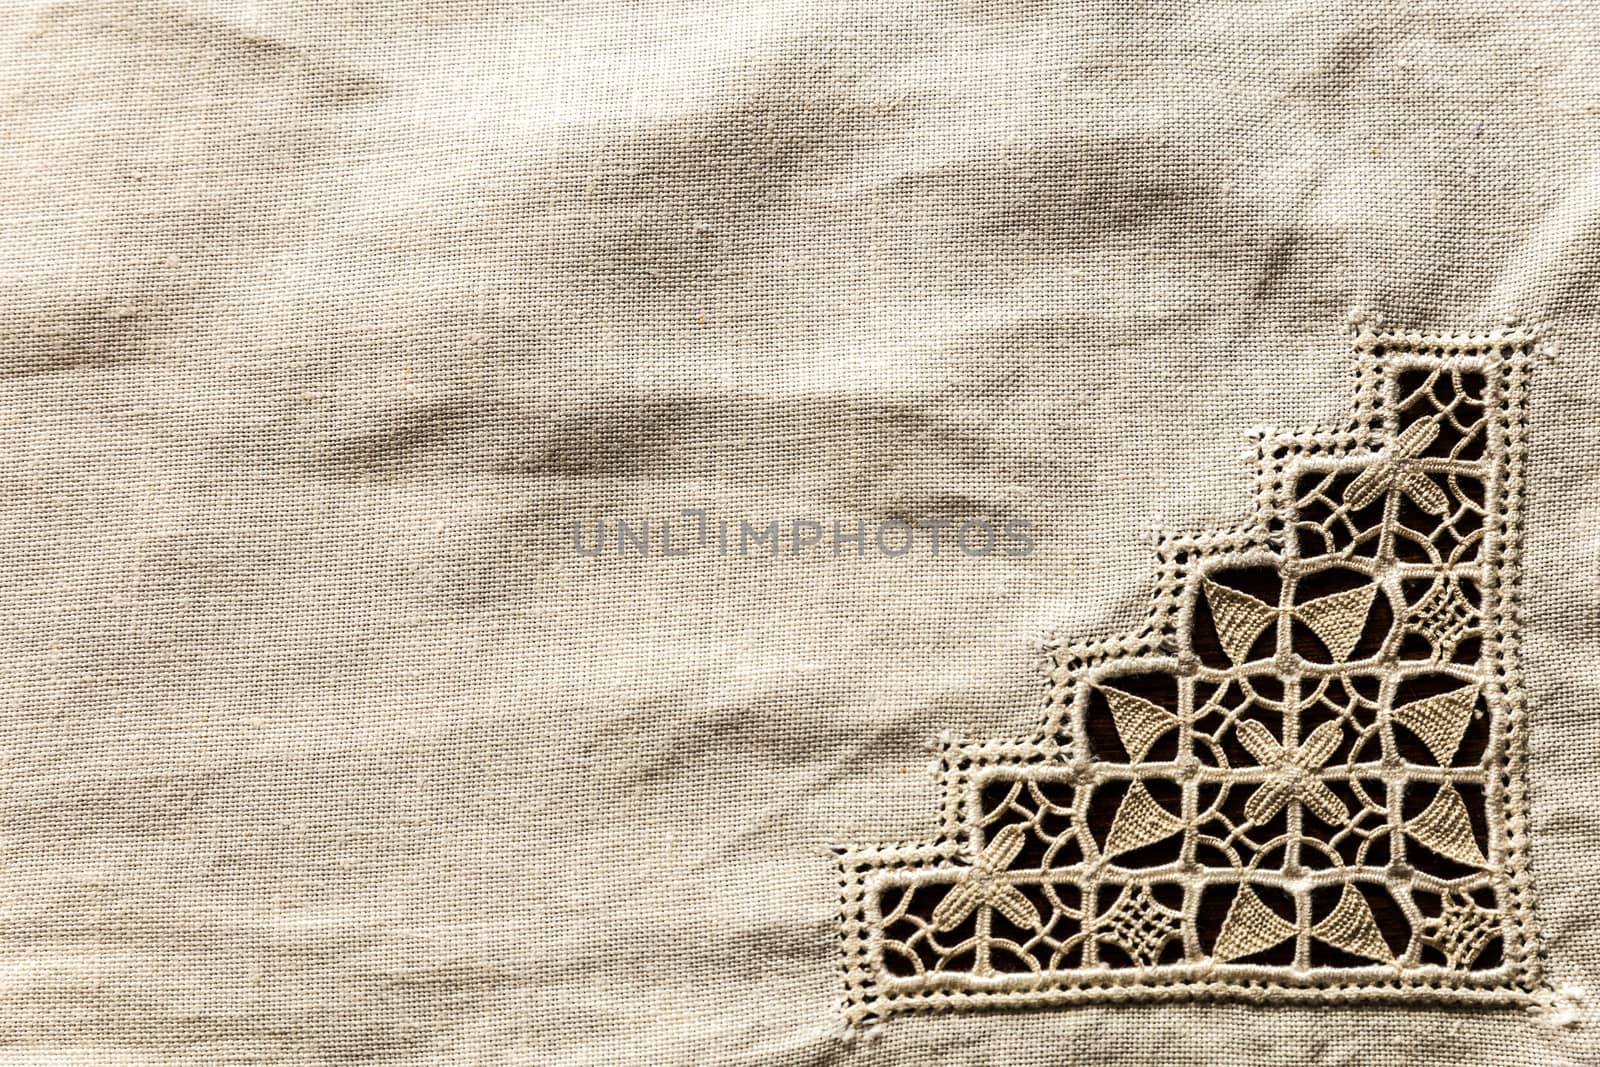 detail of antique handmade embroidered tablecloth